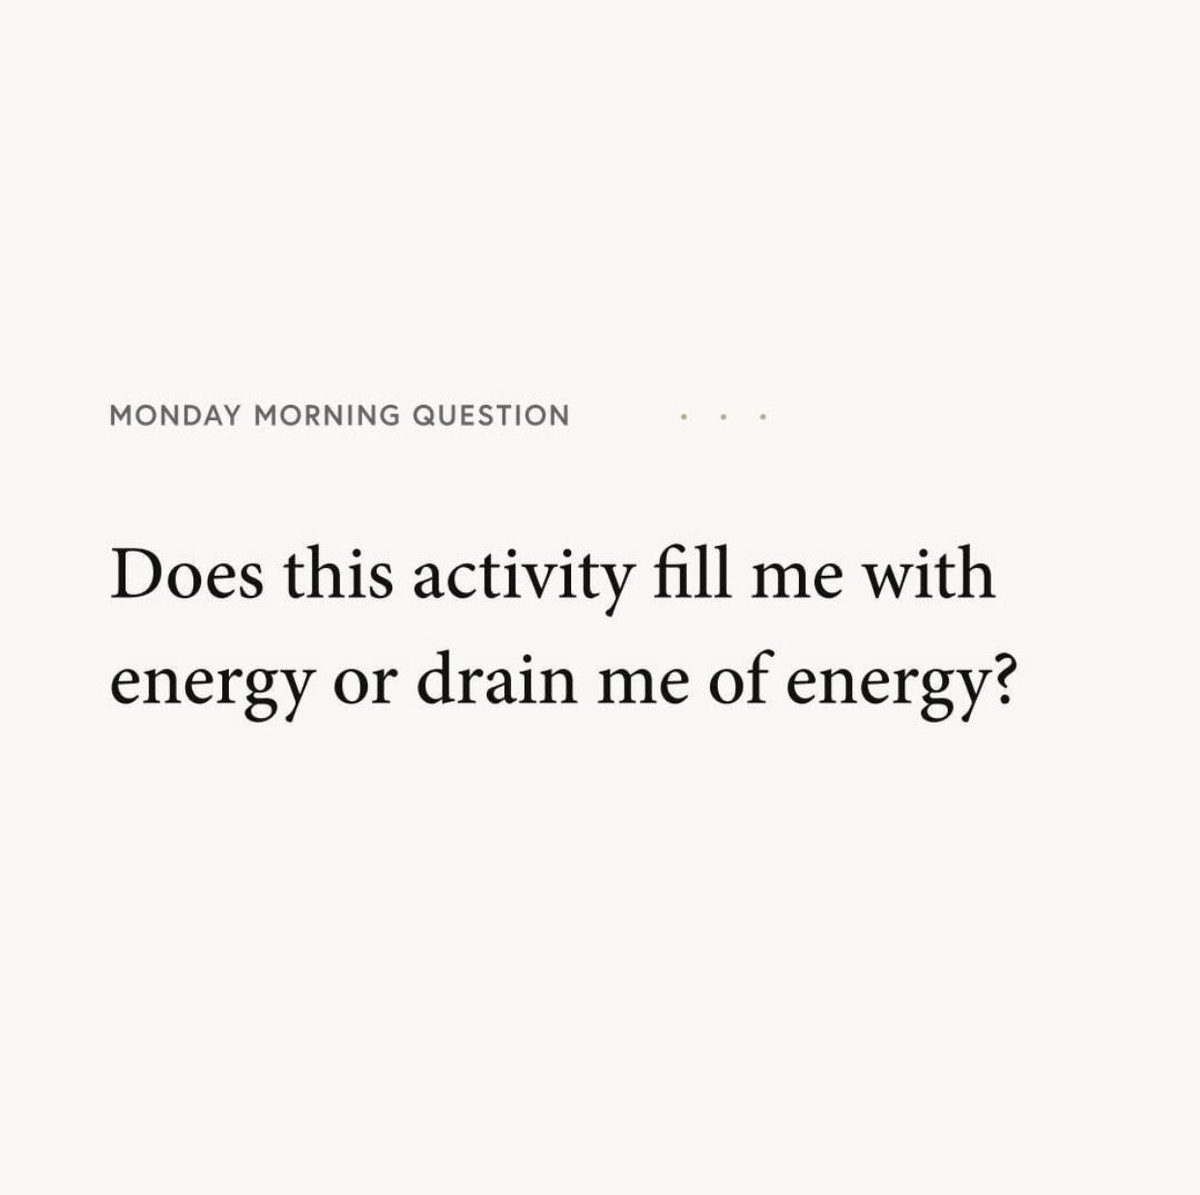 MONDAY MOTIVATION via @JamesClear Use this simple question to help refocus and reframe your time & energy. #MondayMotivation #OneLifeToLive